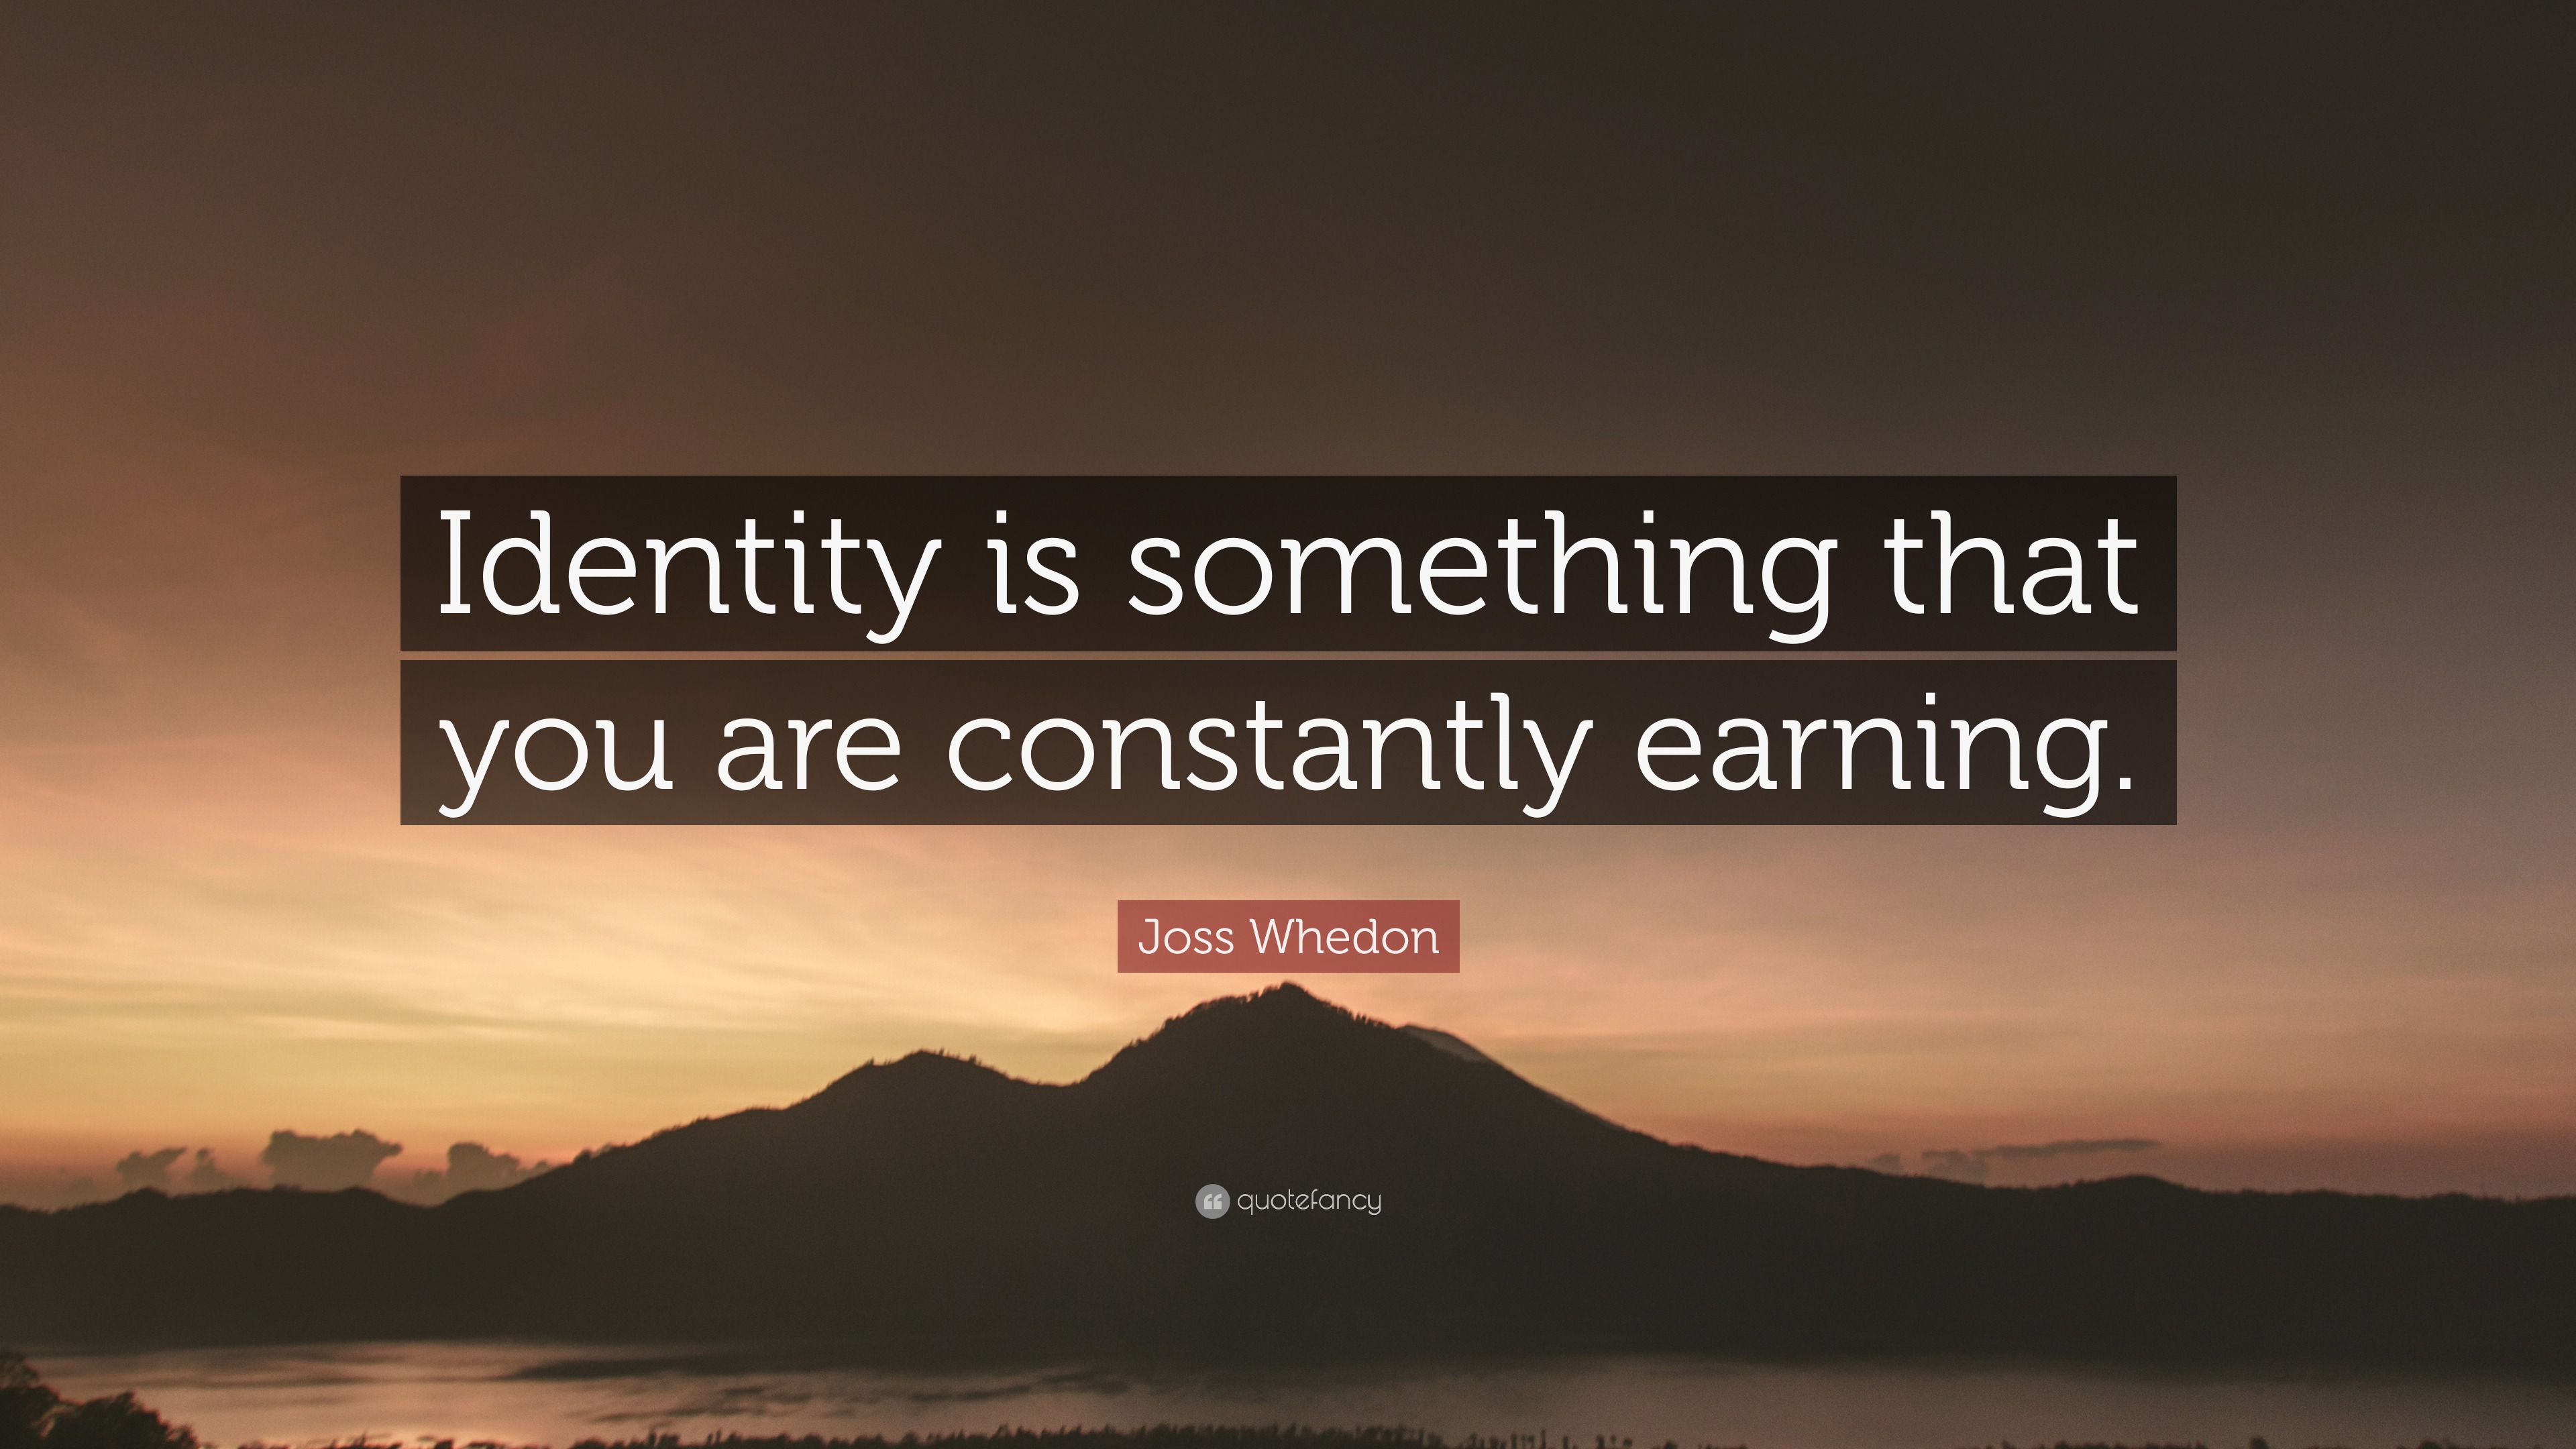 Joss Whedon Quote: “Identity is something that you are constantly